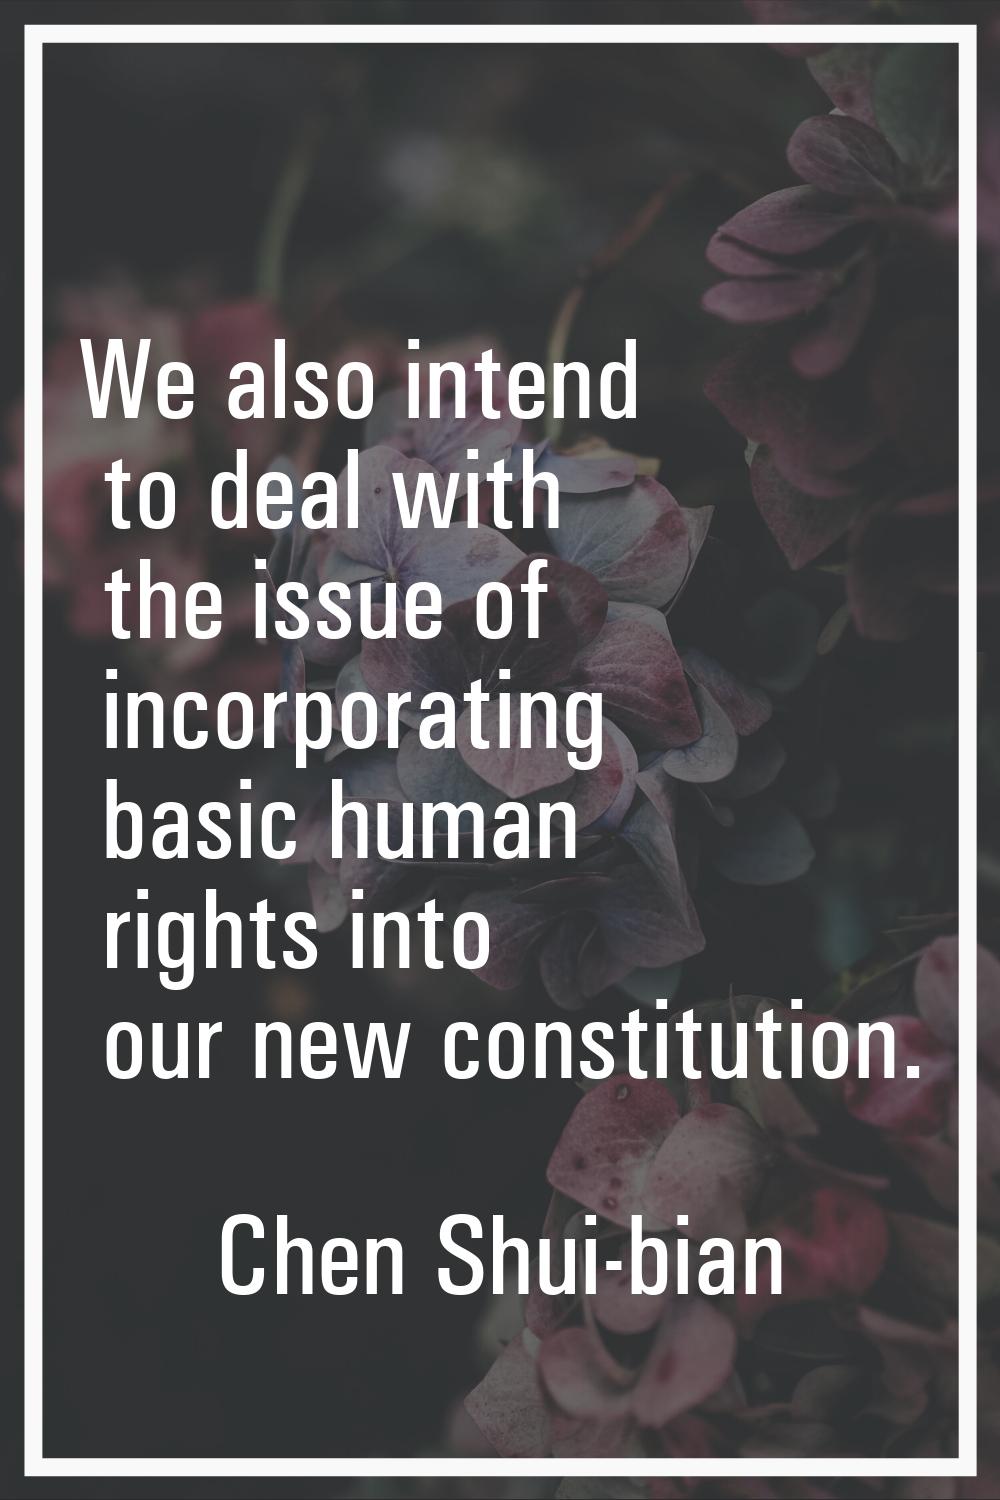 We also intend to deal with the issue of incorporating basic human rights into our new constitution